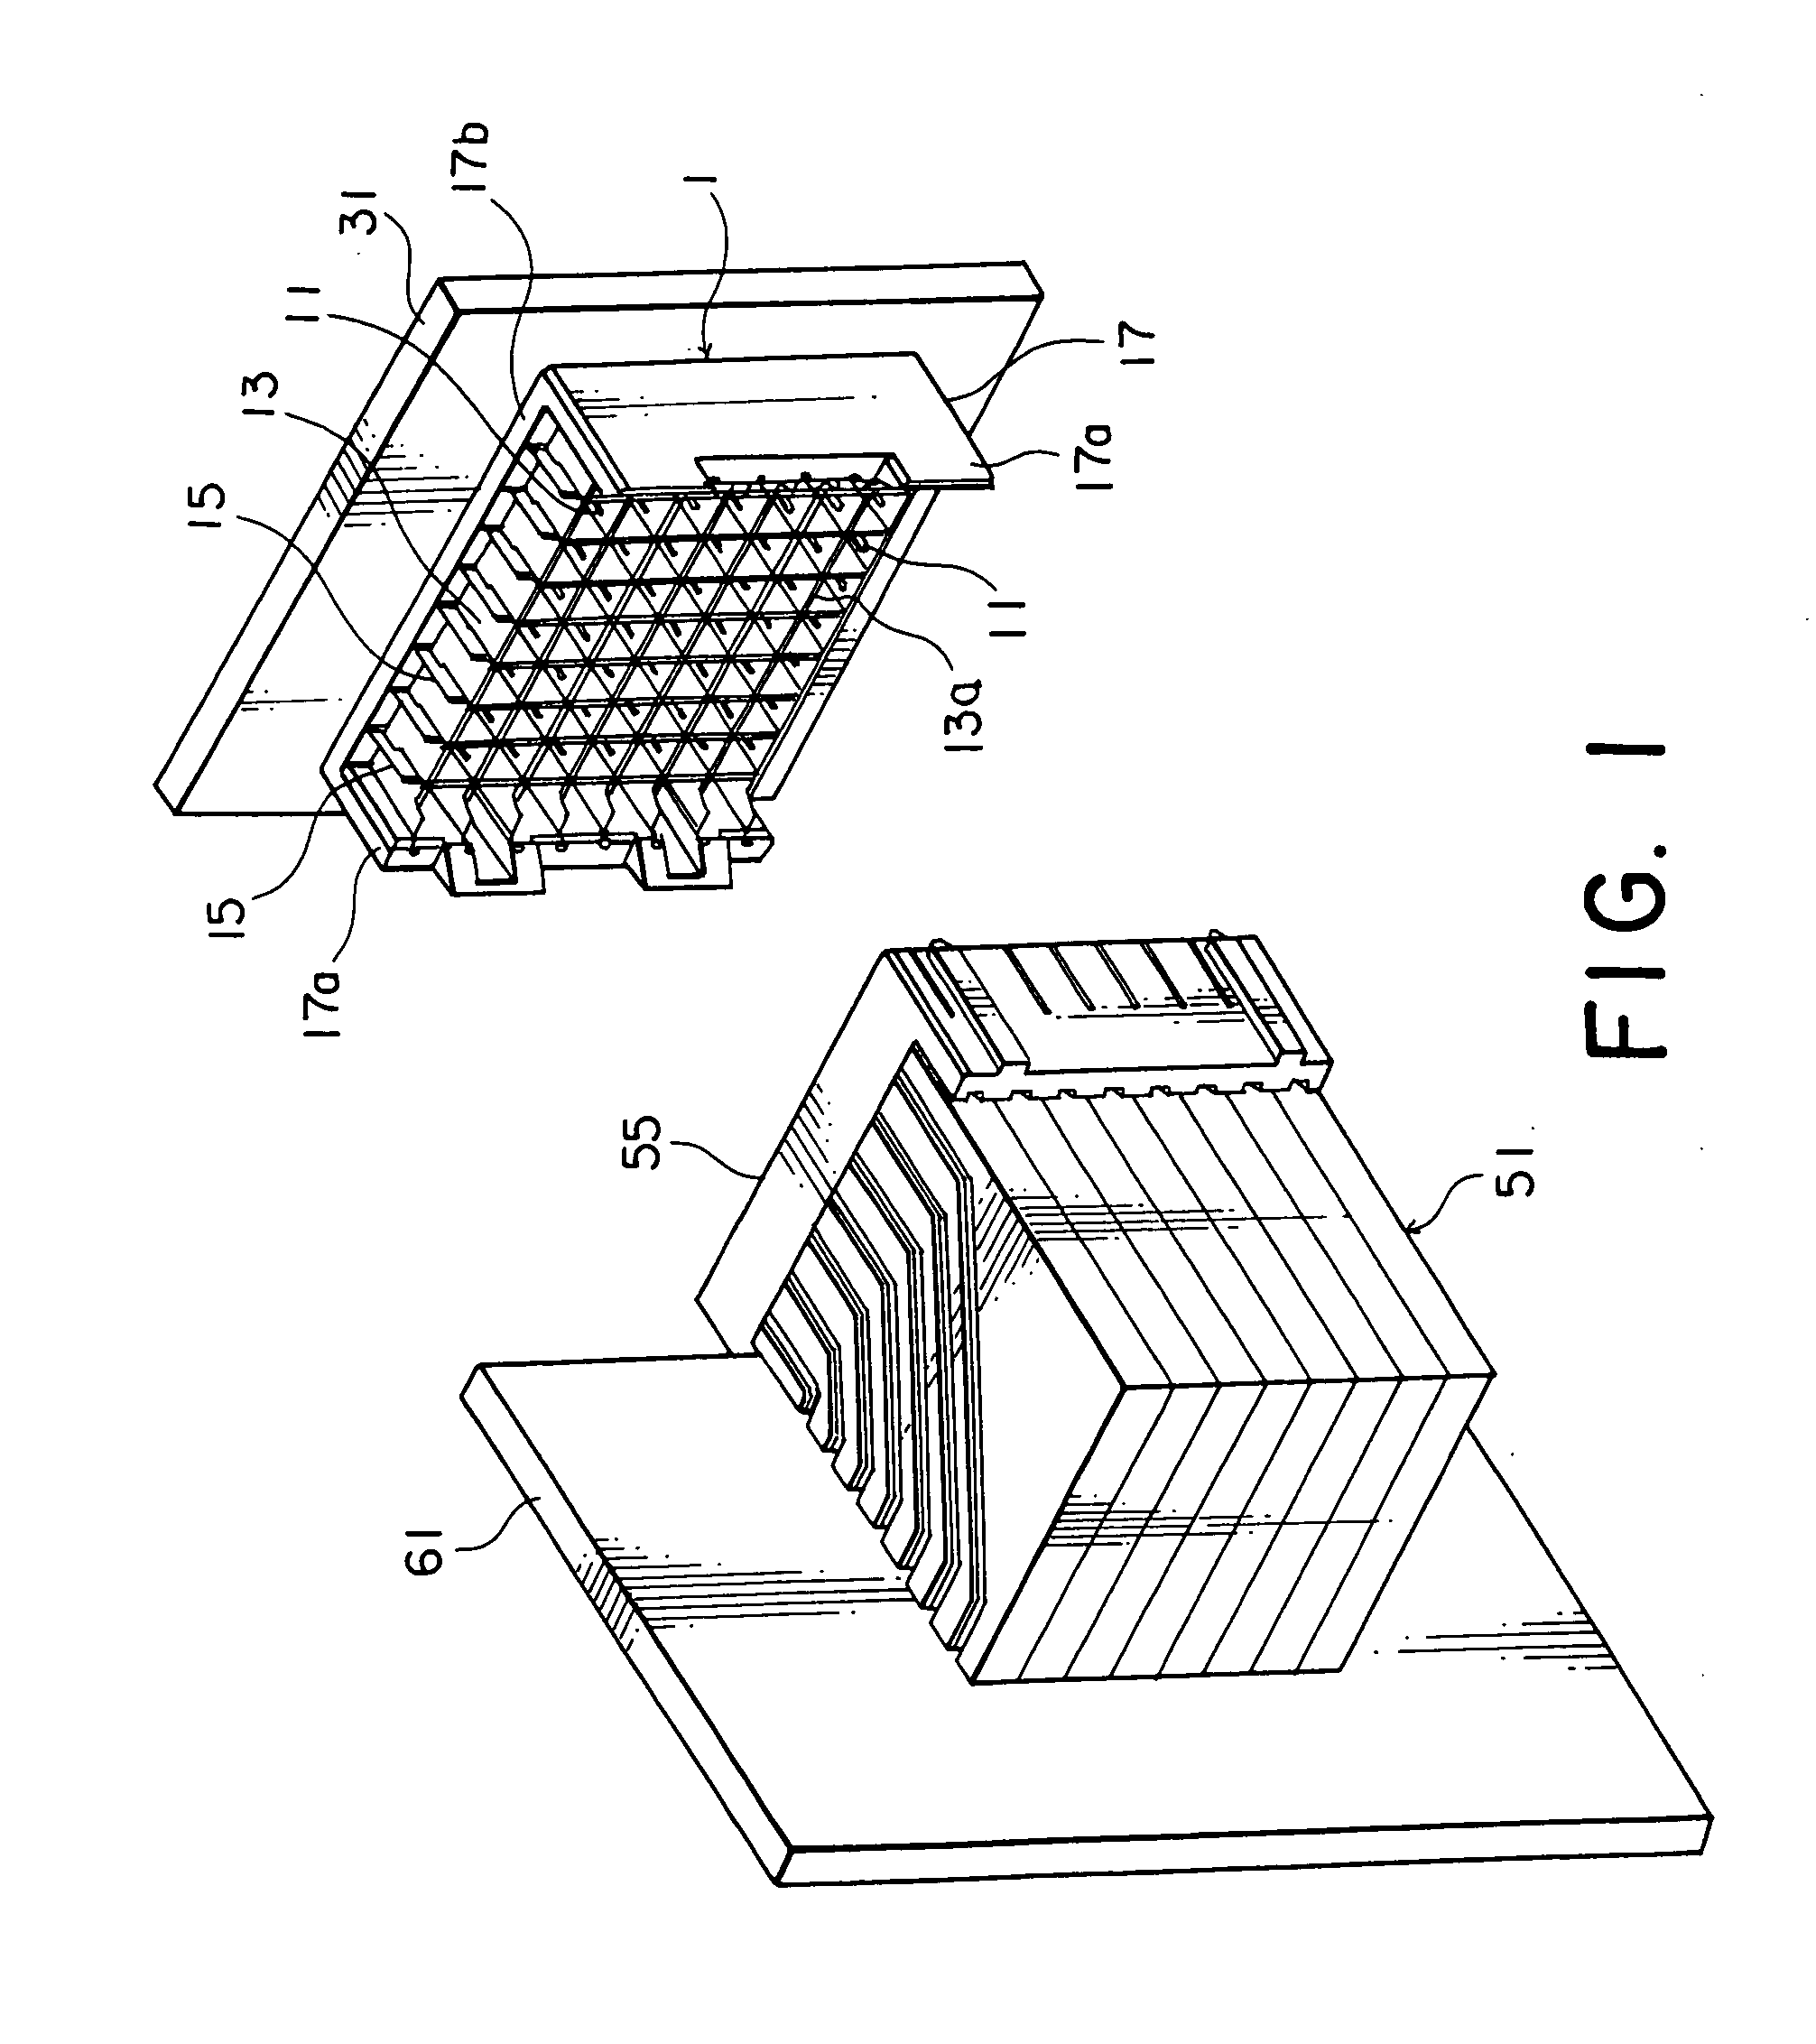 Electrical connector for use in transmitting a signal